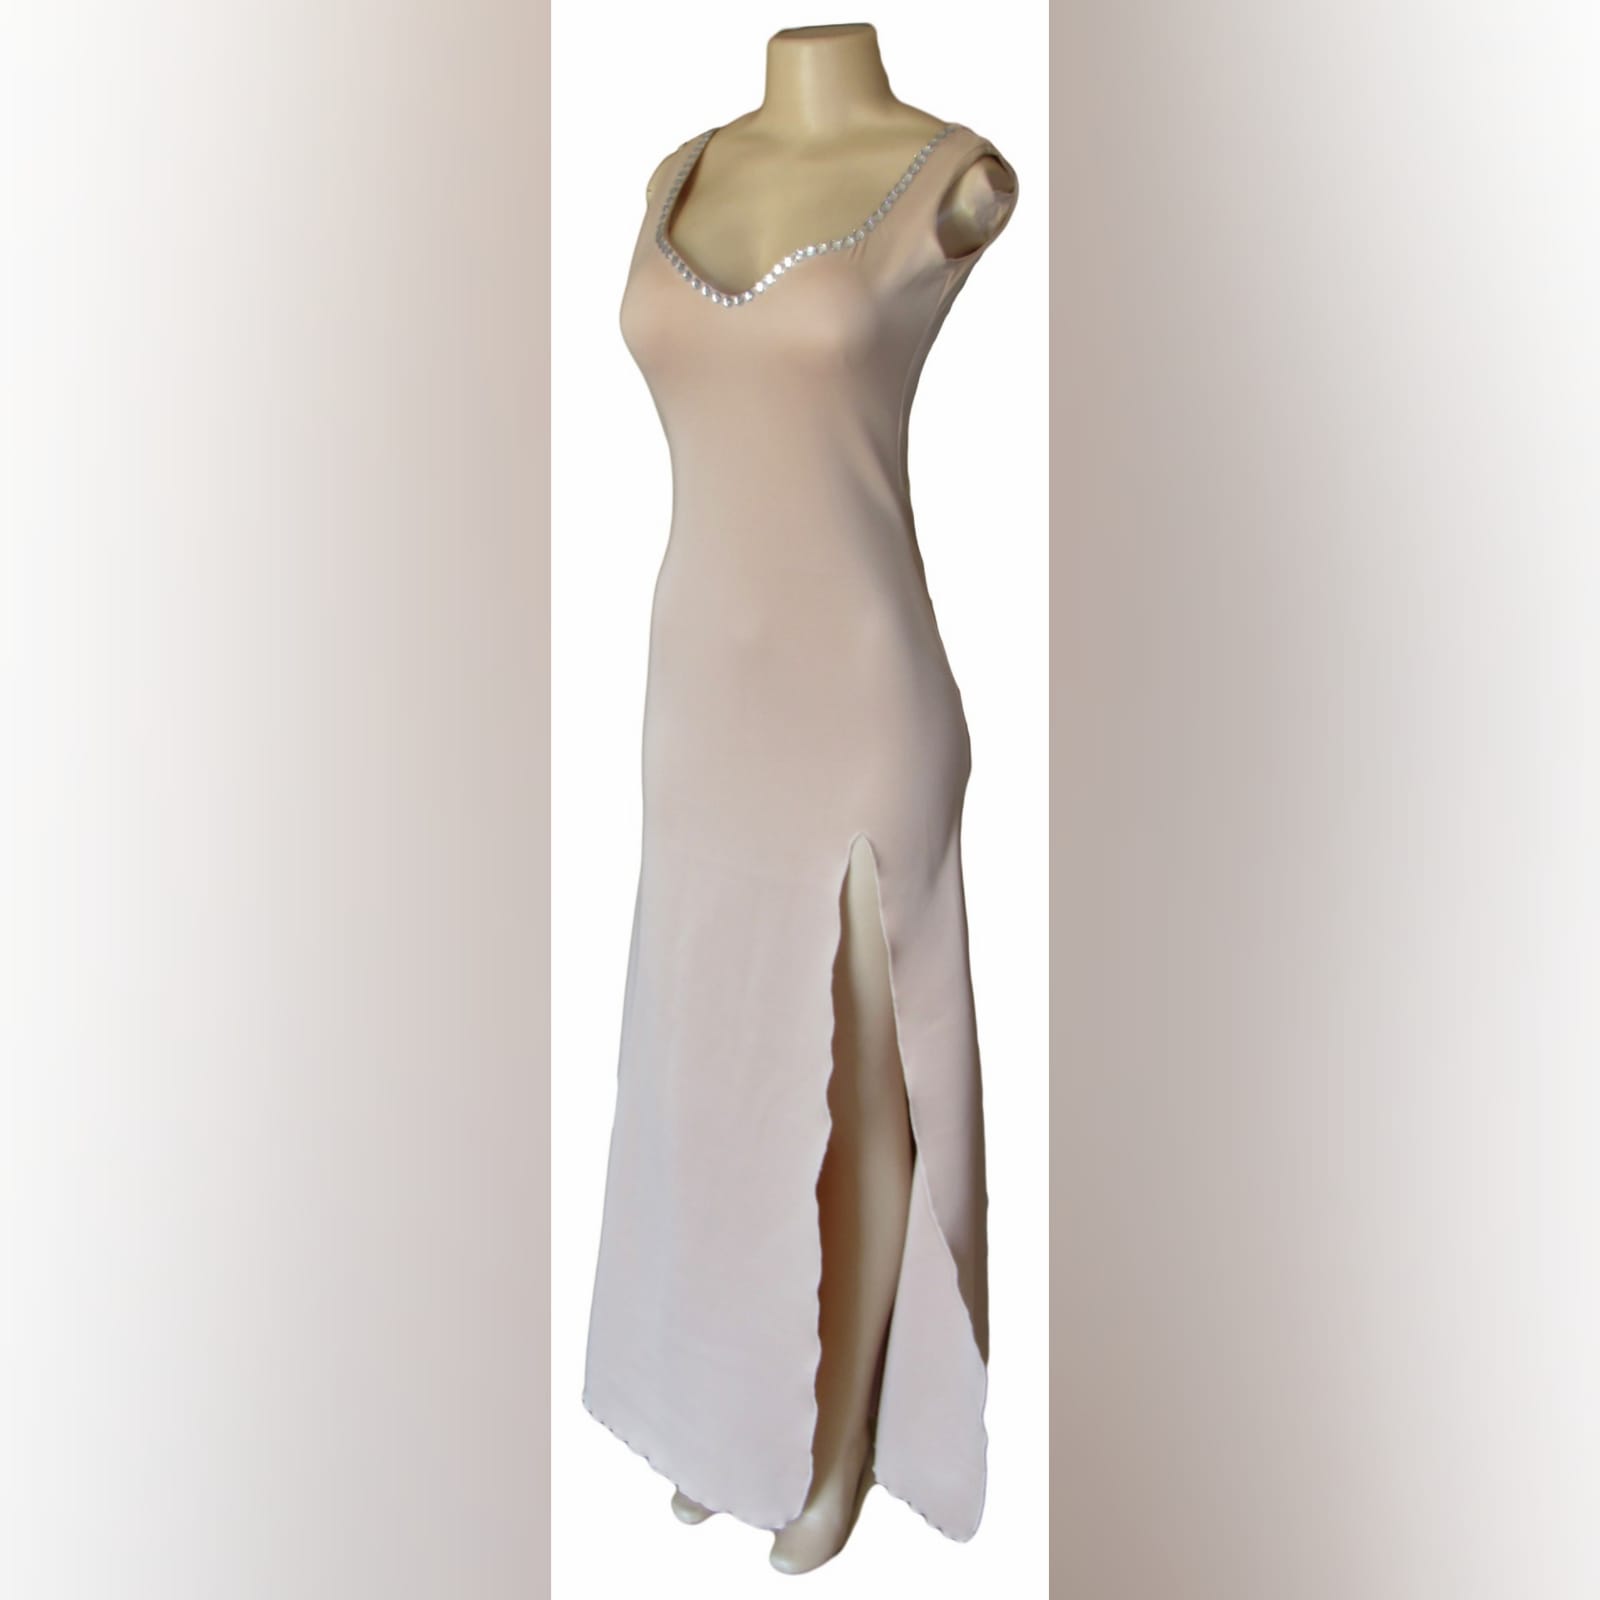 Nude simple elegant formal dress 5 nude simple elegant formal dress with a sweetheart neckline and a low rounded open back. Detailed with silver beads and a slit.